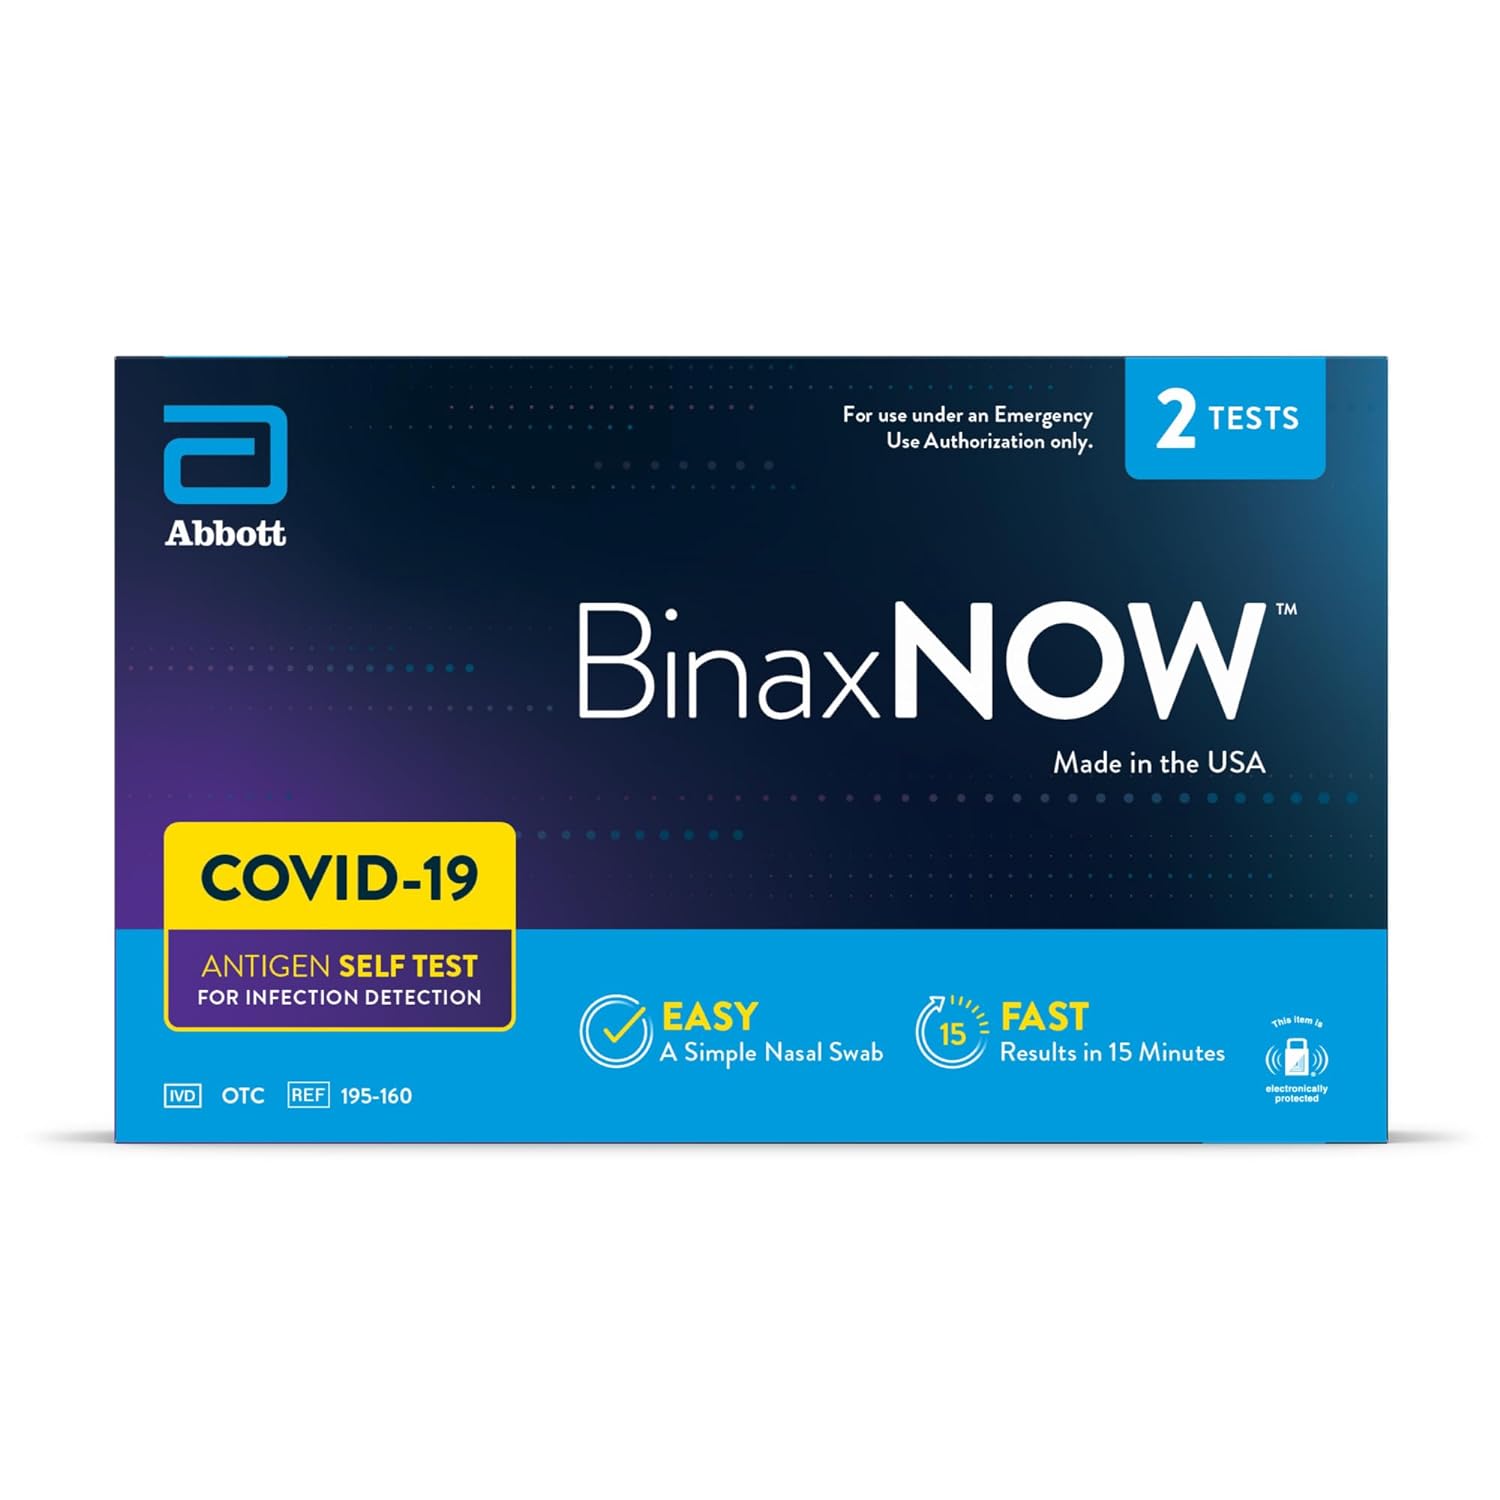 BinaxNOW COVID‐19 Antigen Self Test, 1 Pack, Double, 2-count, At Home COVID-19 Test, 2 Tests - image 13 of 13